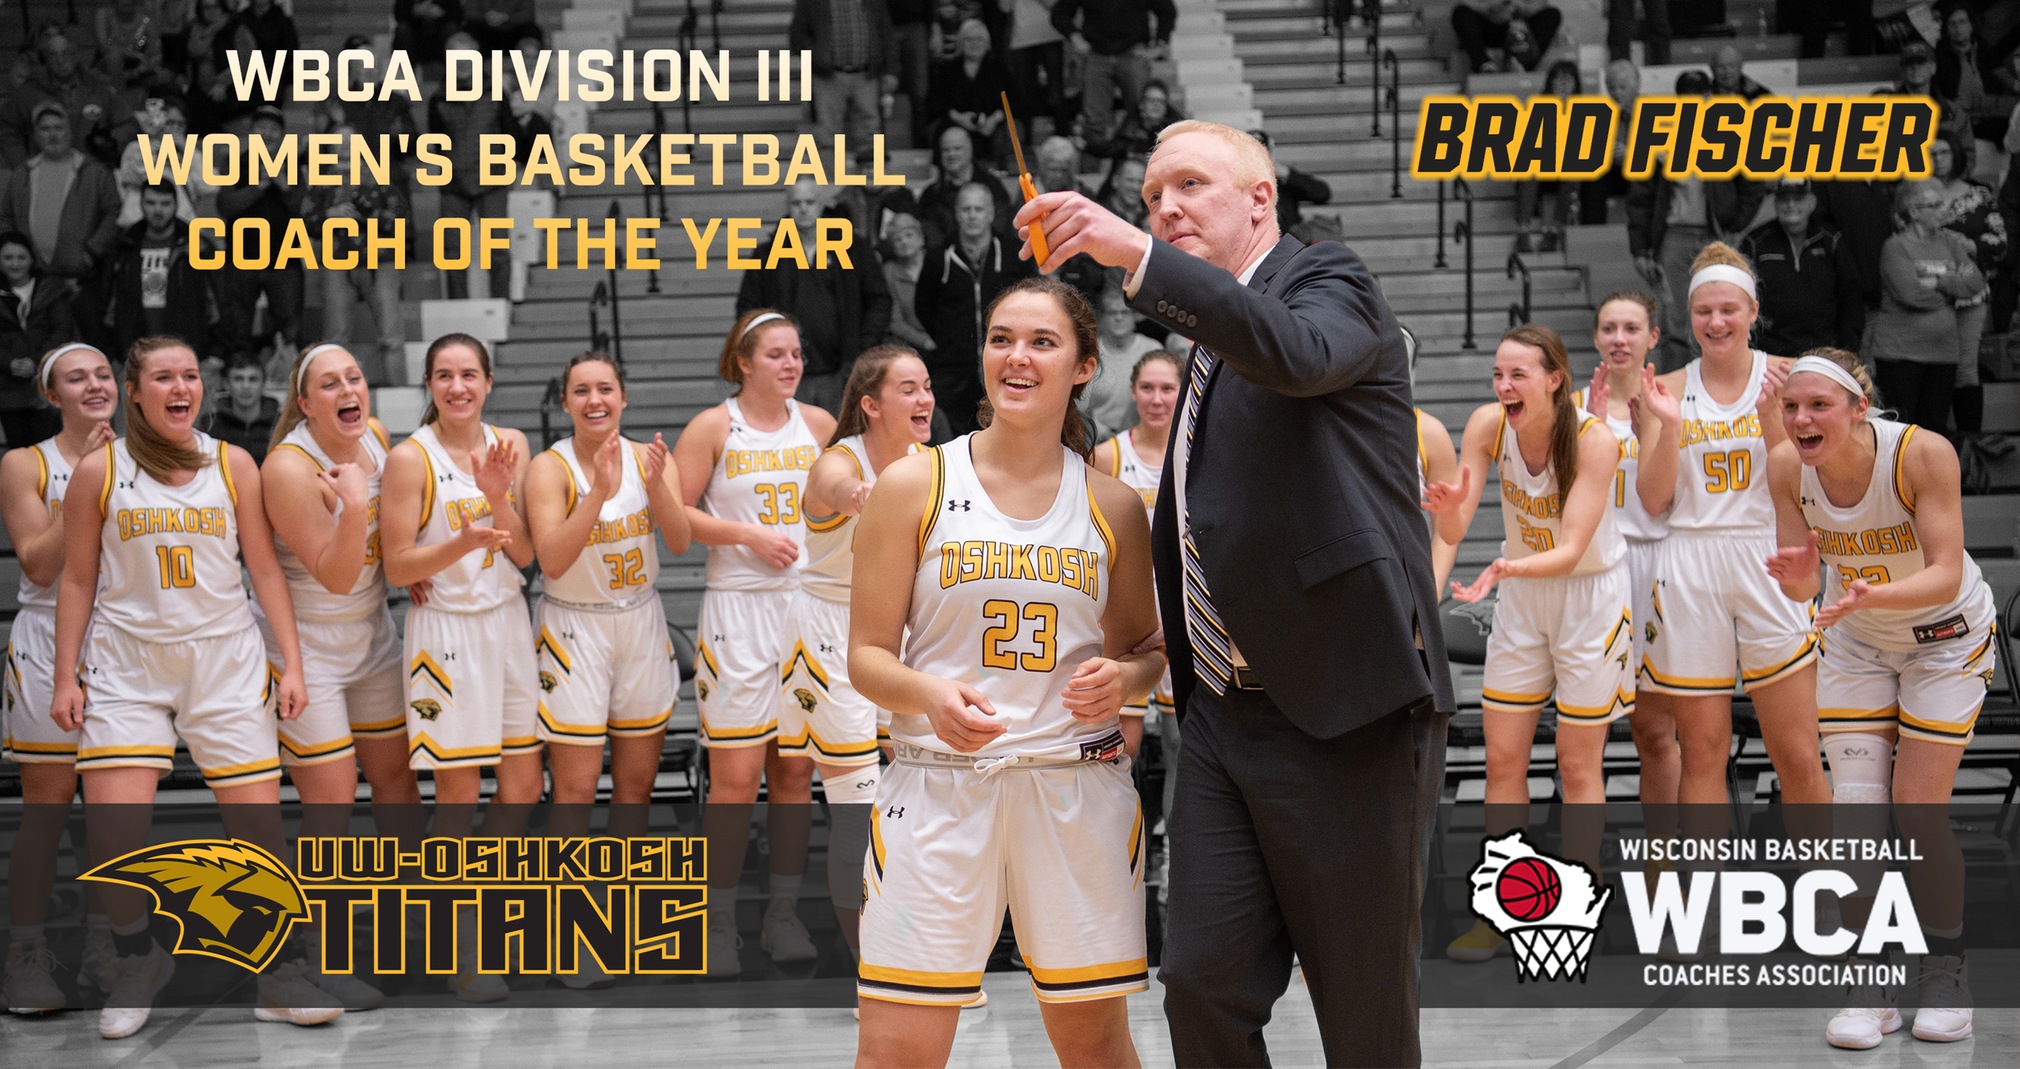 WBCA Selects Fischer As Division III Coach Of The Year